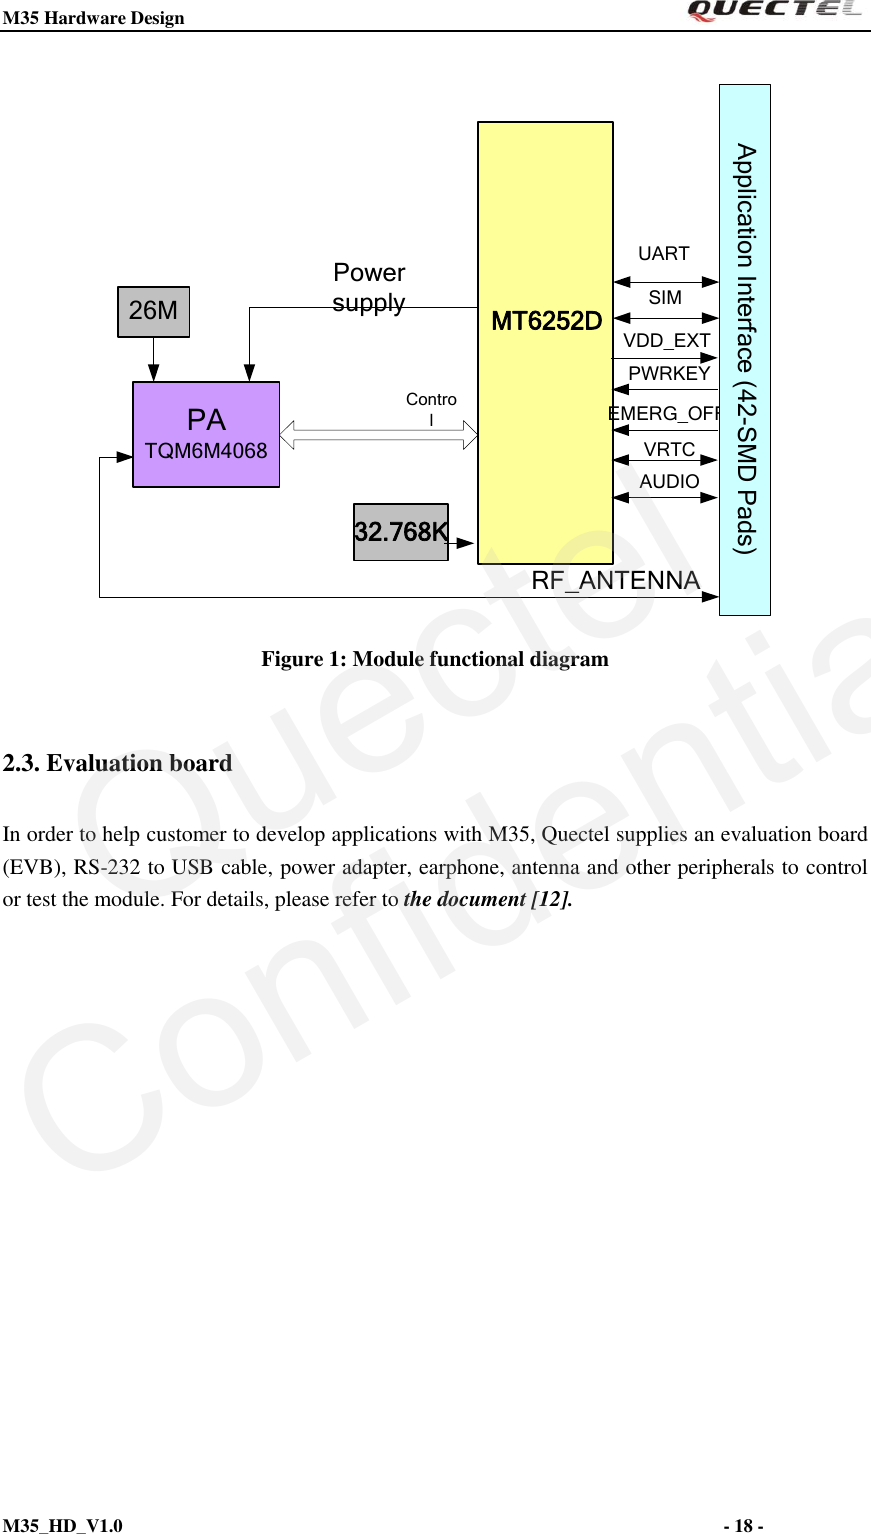 M35 Hardware Design                                                                  M35_HD_V1.0                                                                                                                         - 18 -    MT6252D32.768KControl26MPower supplyUARTSIMVDD_EXTAUDIOPWRKEYEMERG_OFFVRTCRF_ANTENNAPA   TQM6M4068Application Interface (42-SMD Pads)  Figure 1: Module functional diagram  2.3. Evaluation board In order to help customer to develop applications with M35, Quectel supplies an evaluation board (EVB), RS-232 to USB cable, power adapter, earphone, antenna and other peripherals to control or test the module. For details, please refer to the document [12].               QuectelConfidential